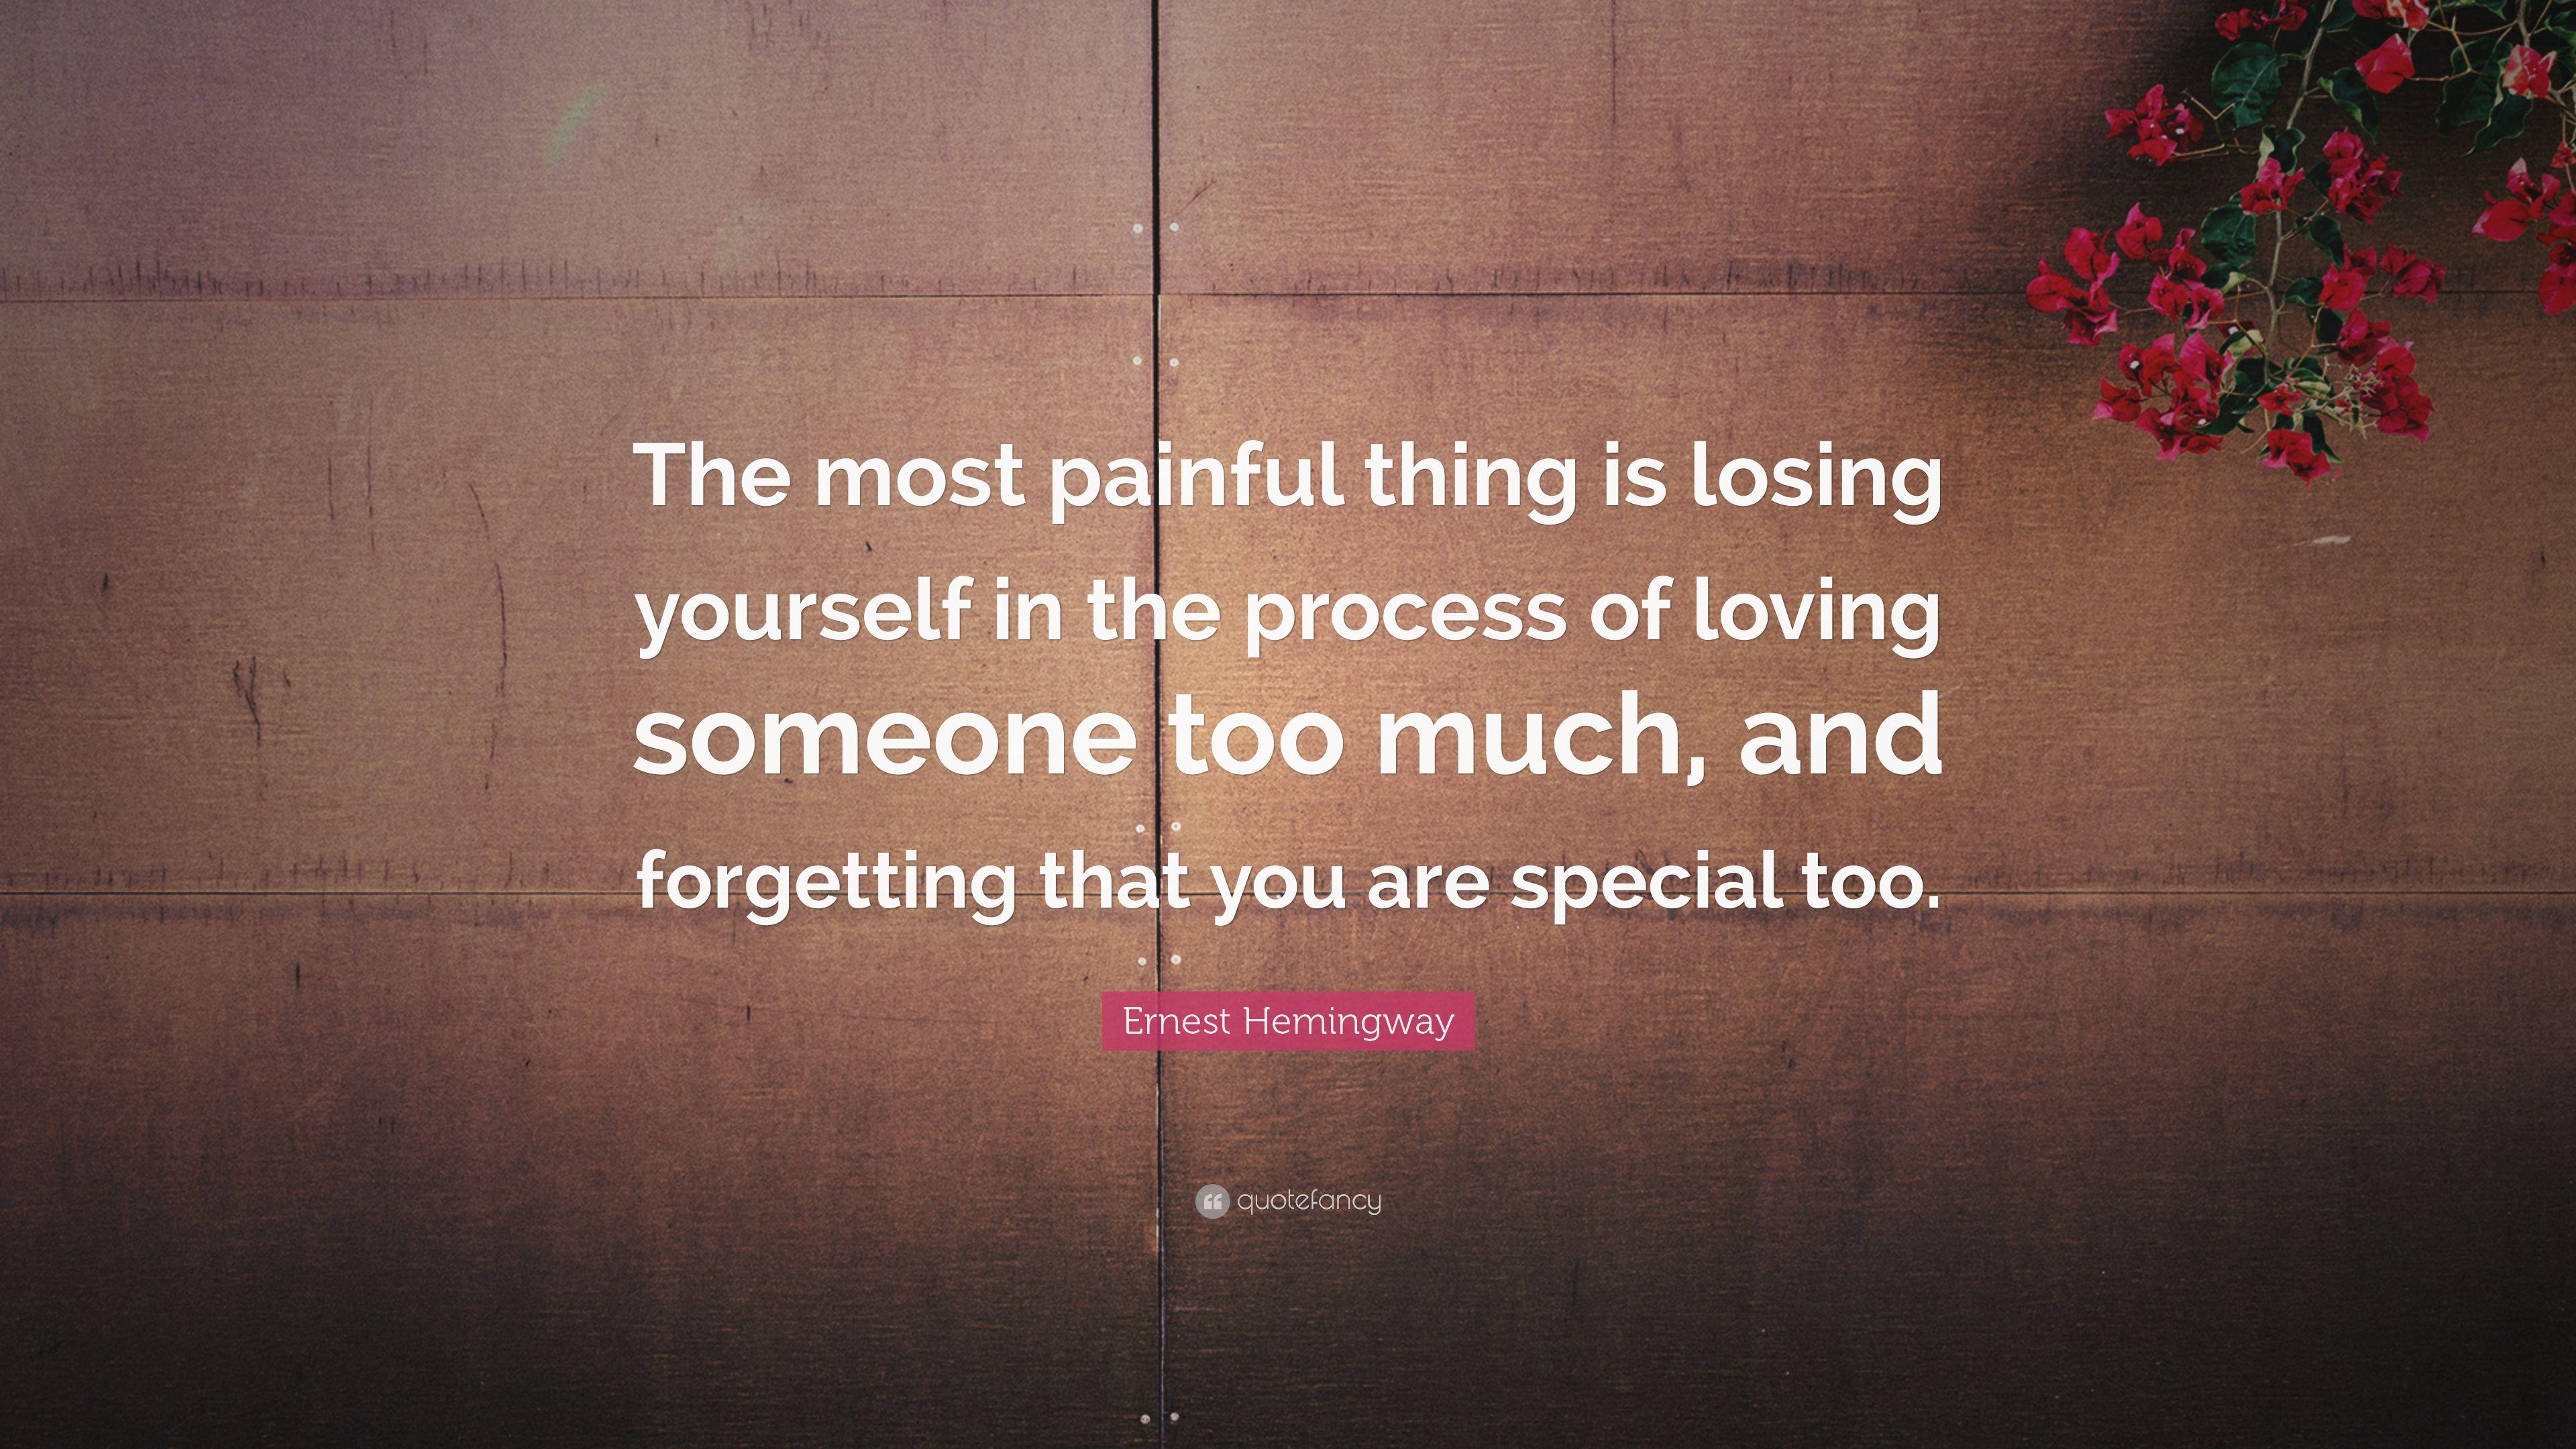 Ernest Hemingway Quote: “The most painful thing is losing yourself